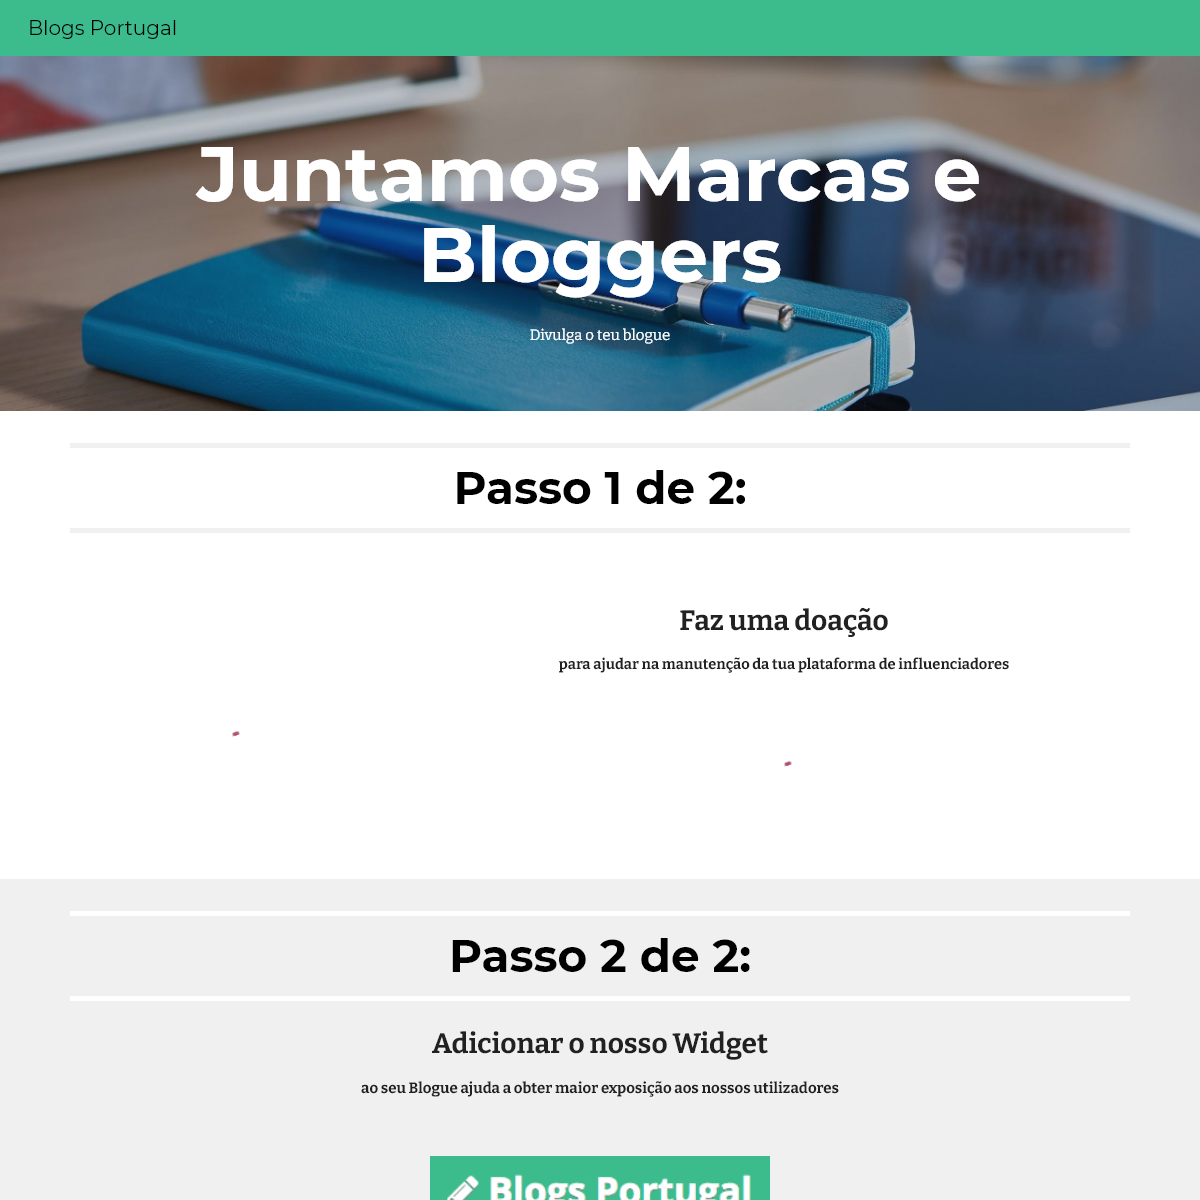 A complete backup of blogsportugal.com